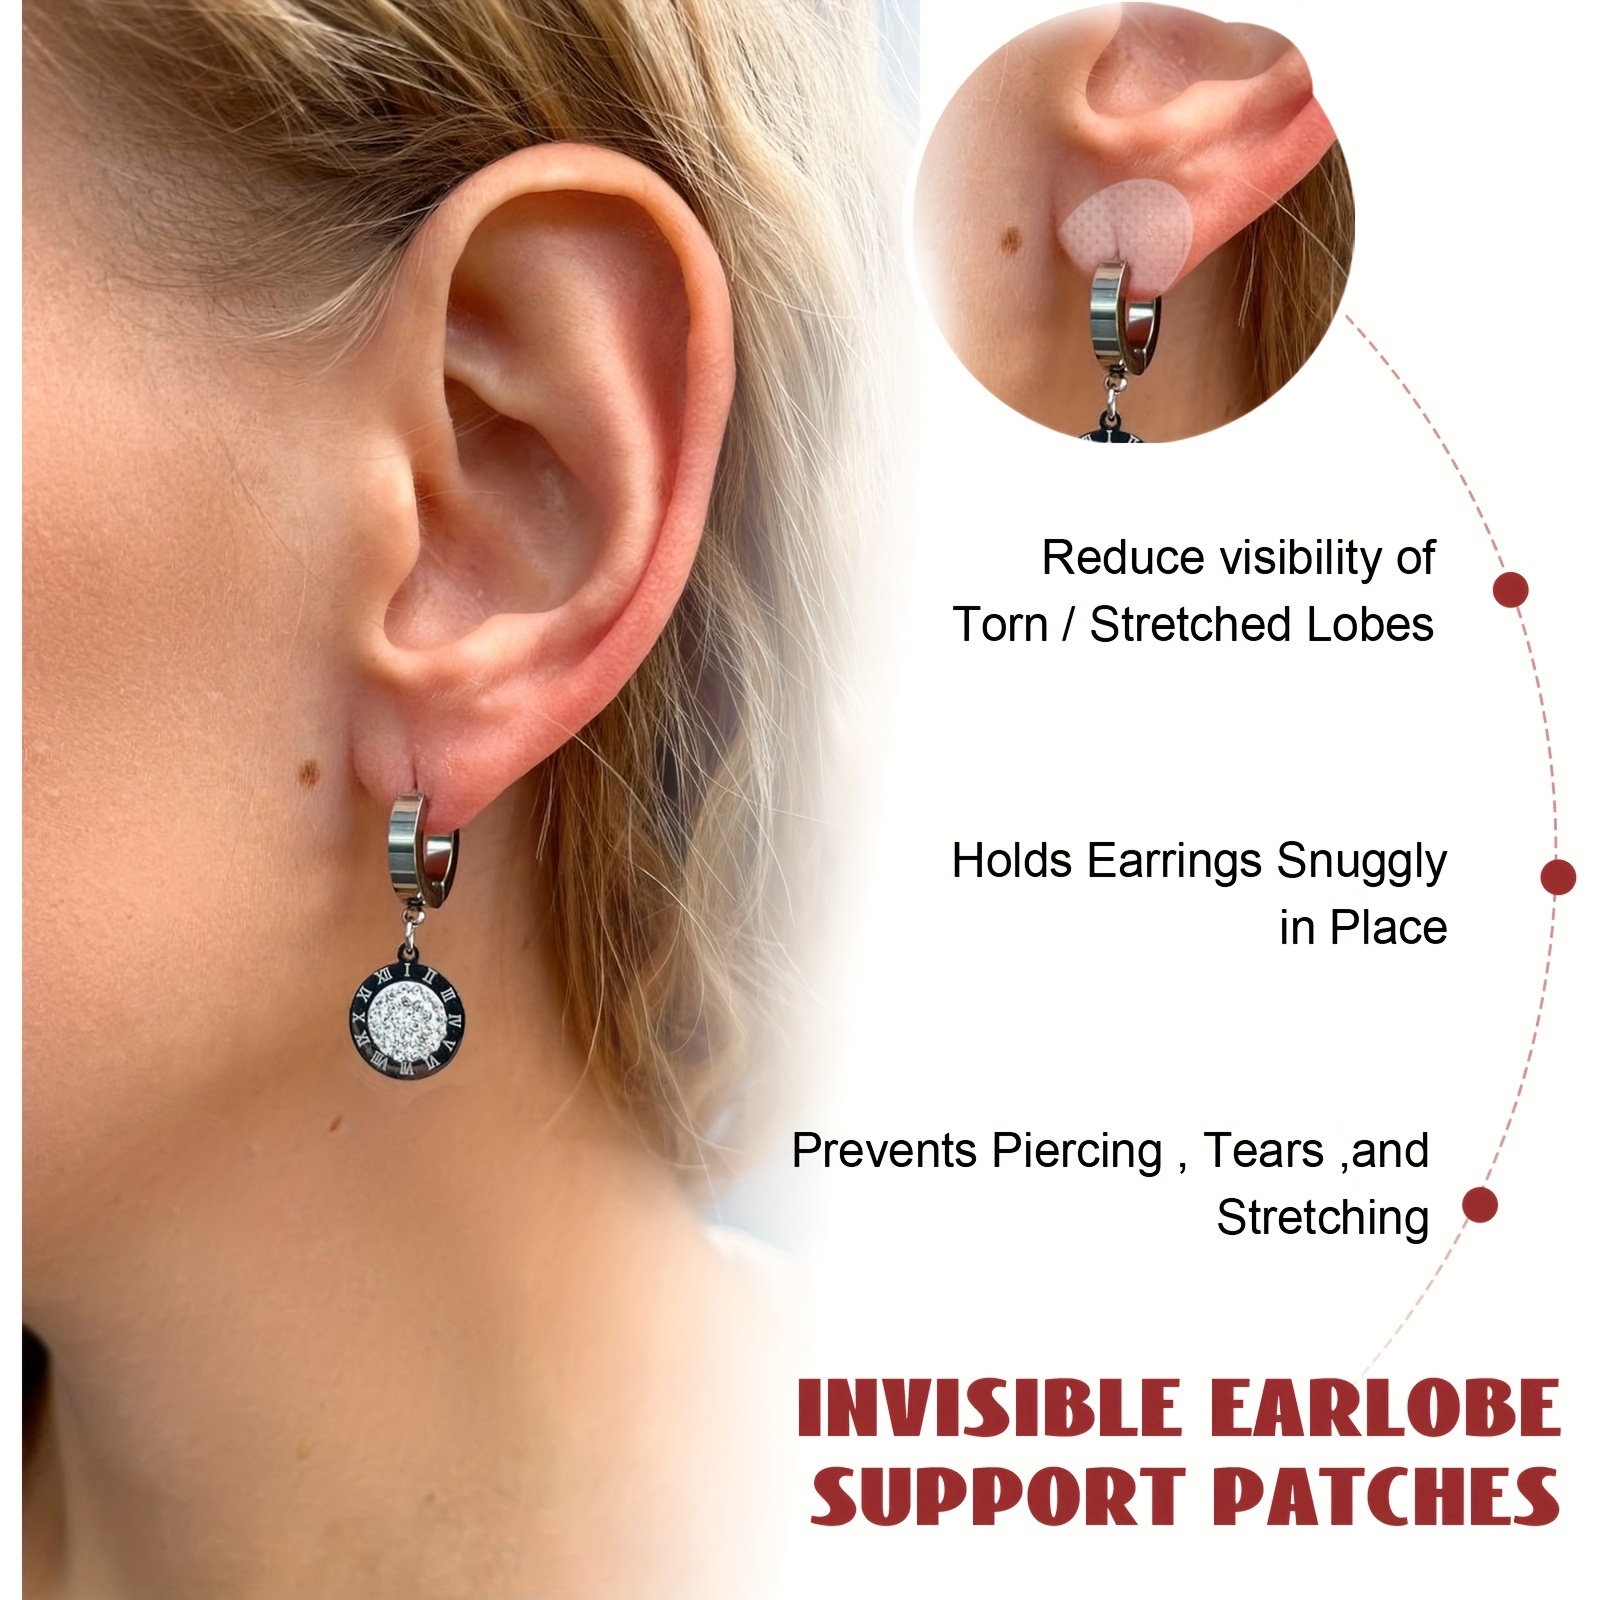 50pcs Ear Lobe Support Patches Invisible Ear Patches Large Earring